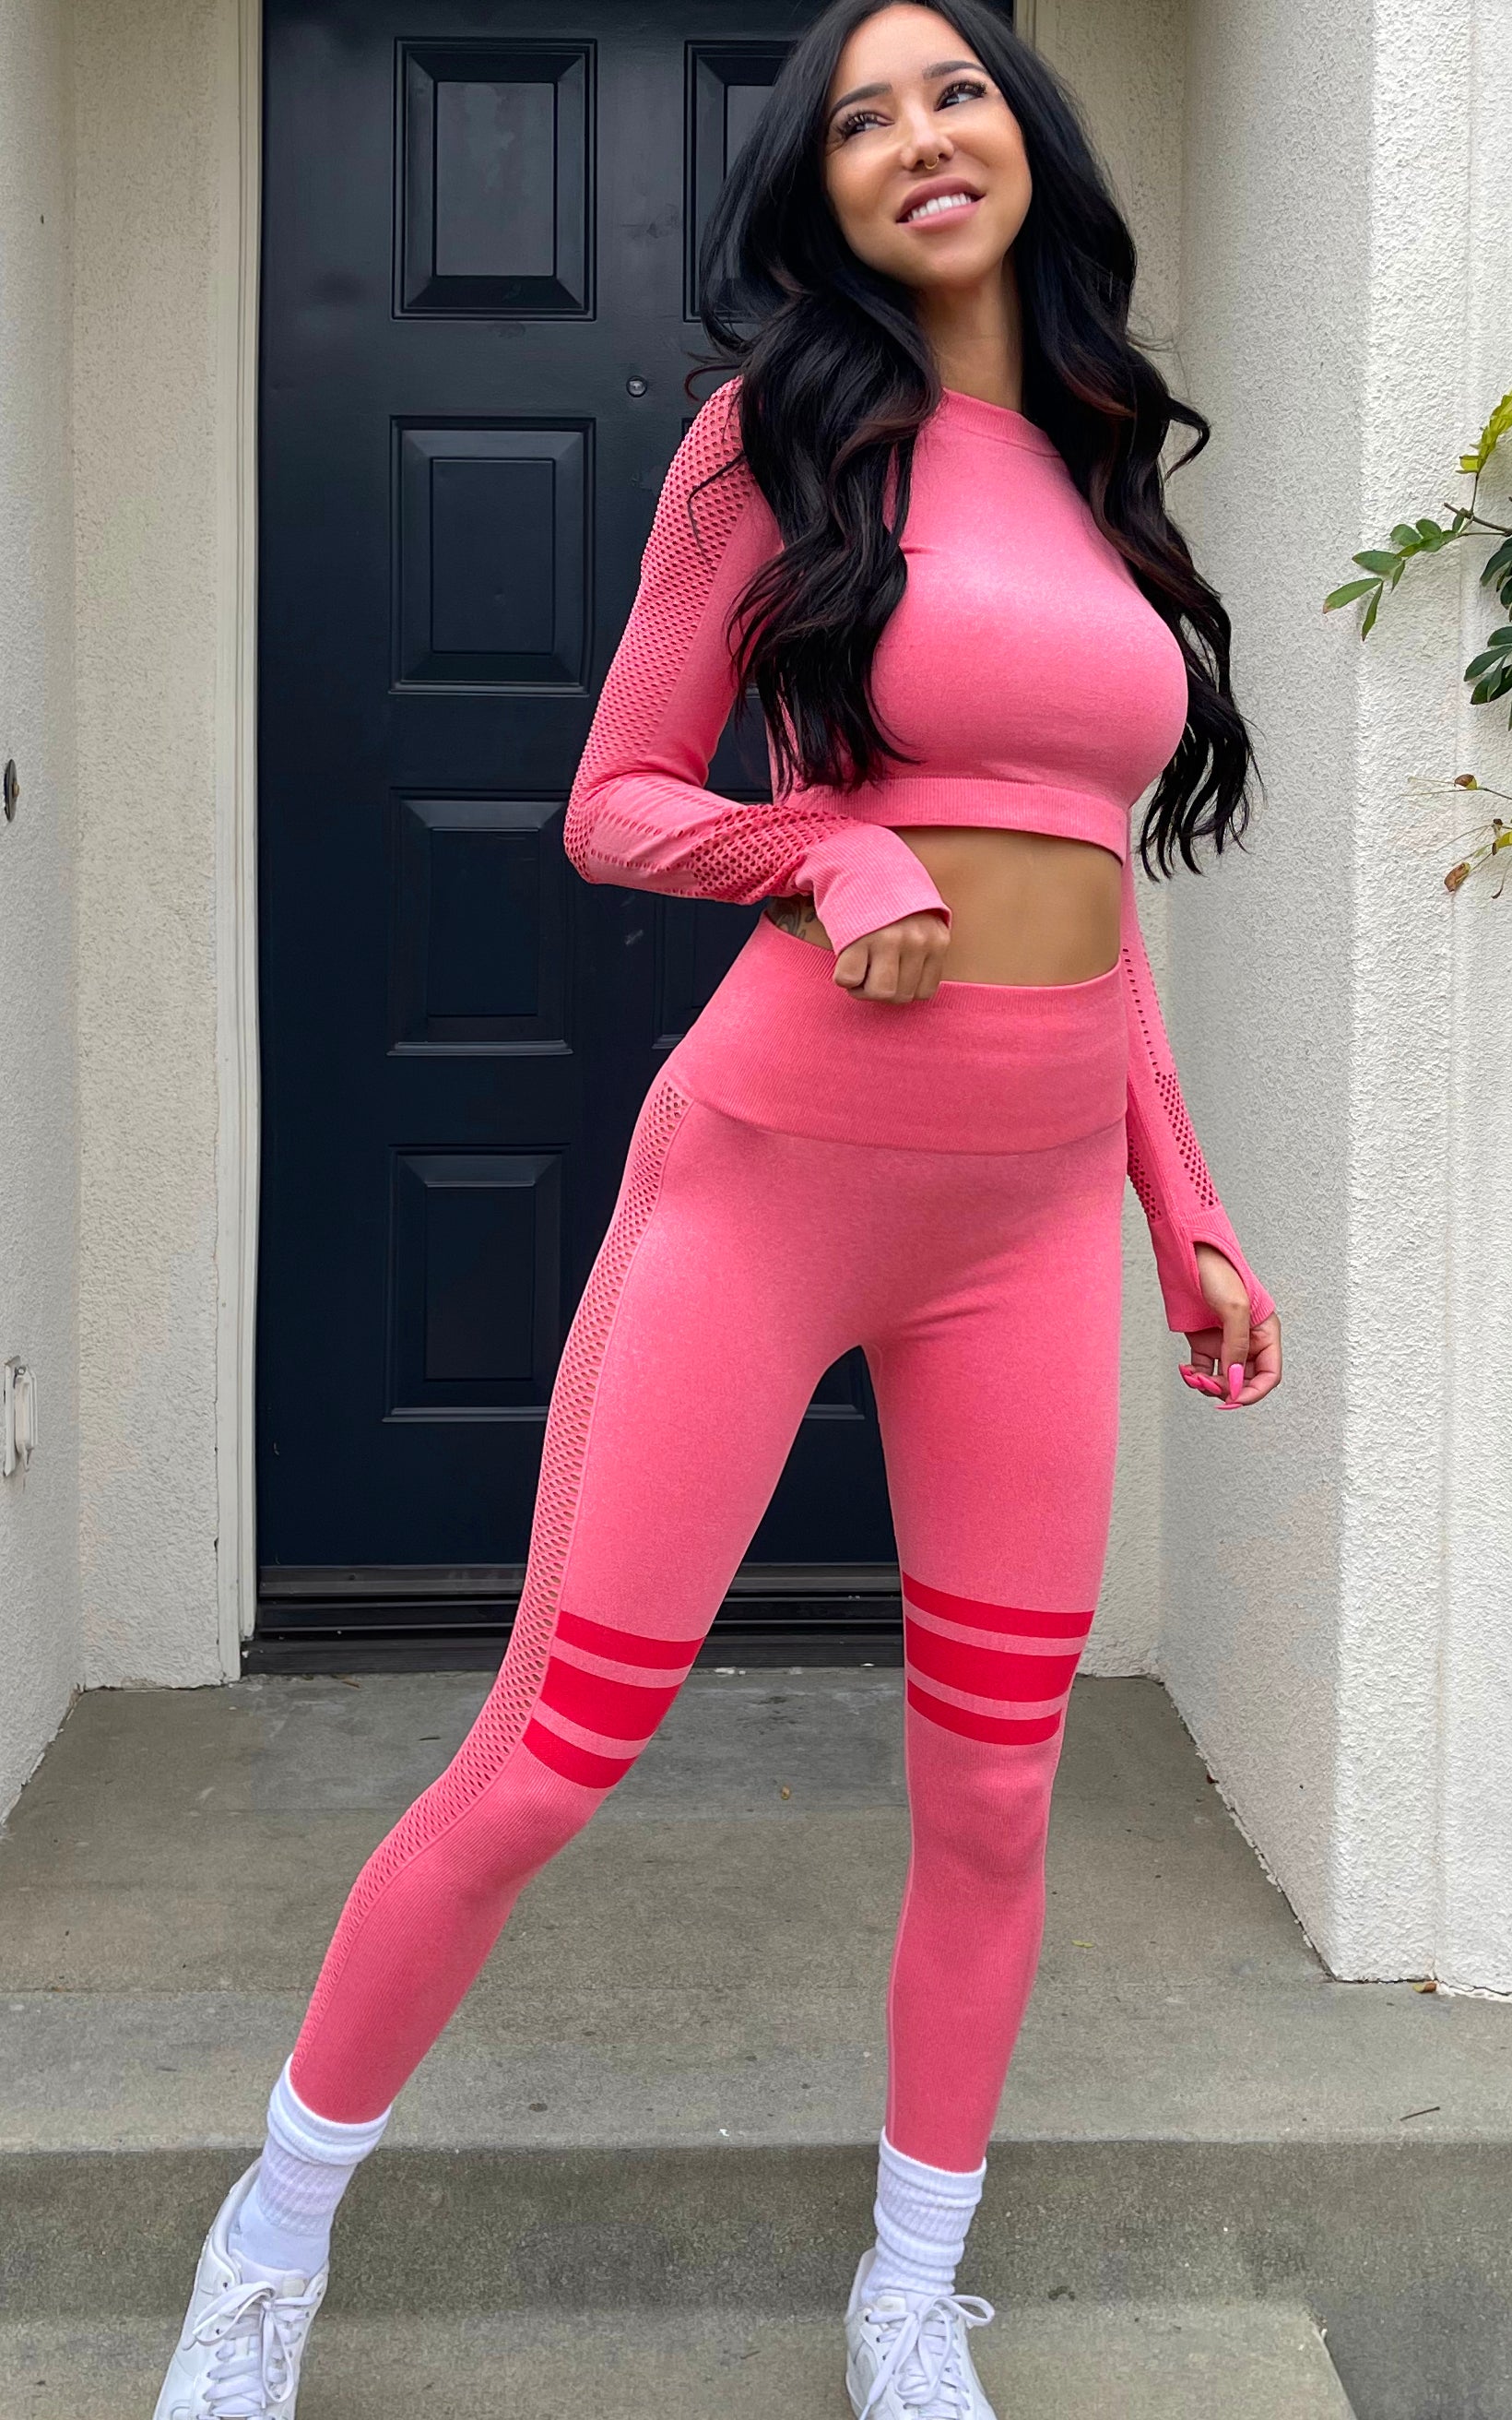 Hustle: Cutout Activewear Set in Pink – Chynna Dolls